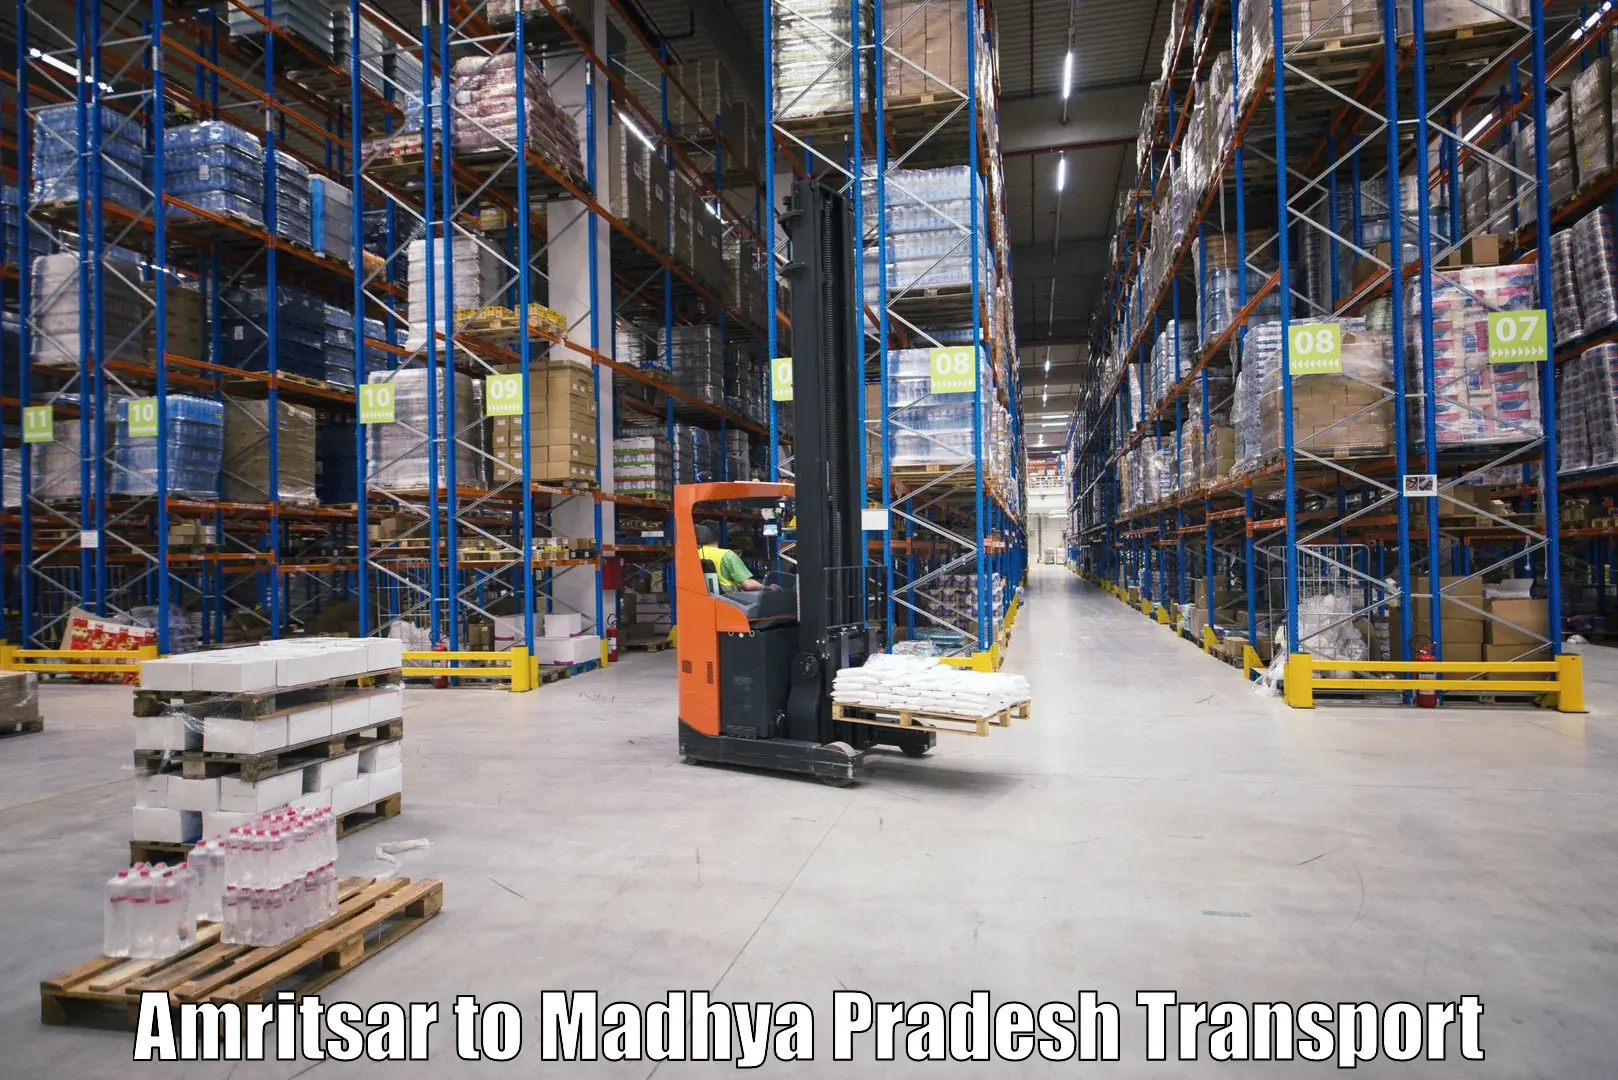 Daily parcel service transport Amritsar to Petlawad